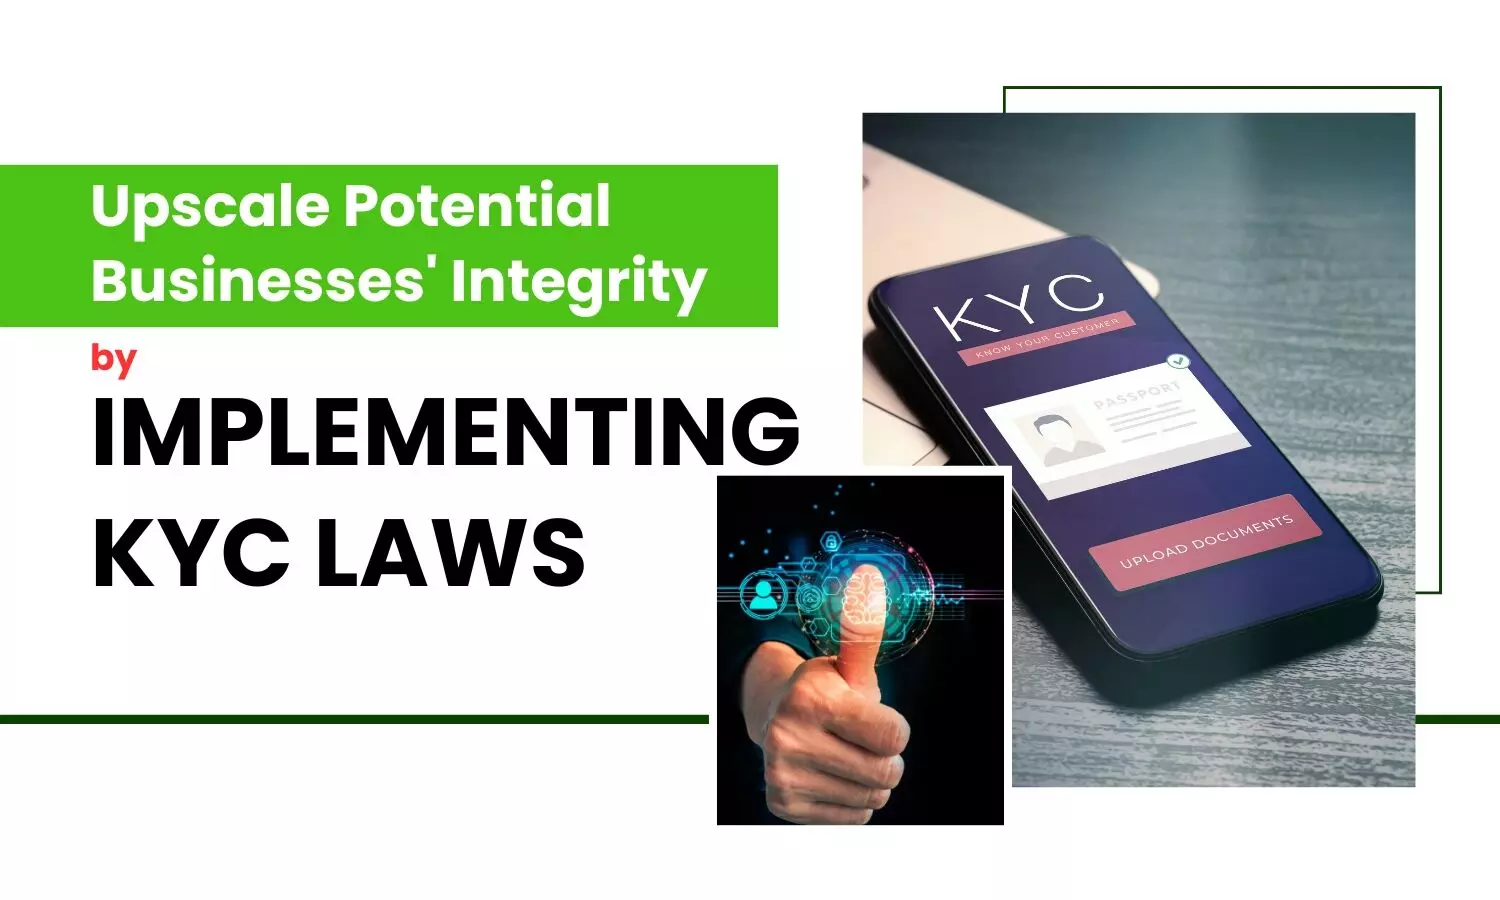 Upscale Potential Businesses Integrity by Implementing KYC Laws